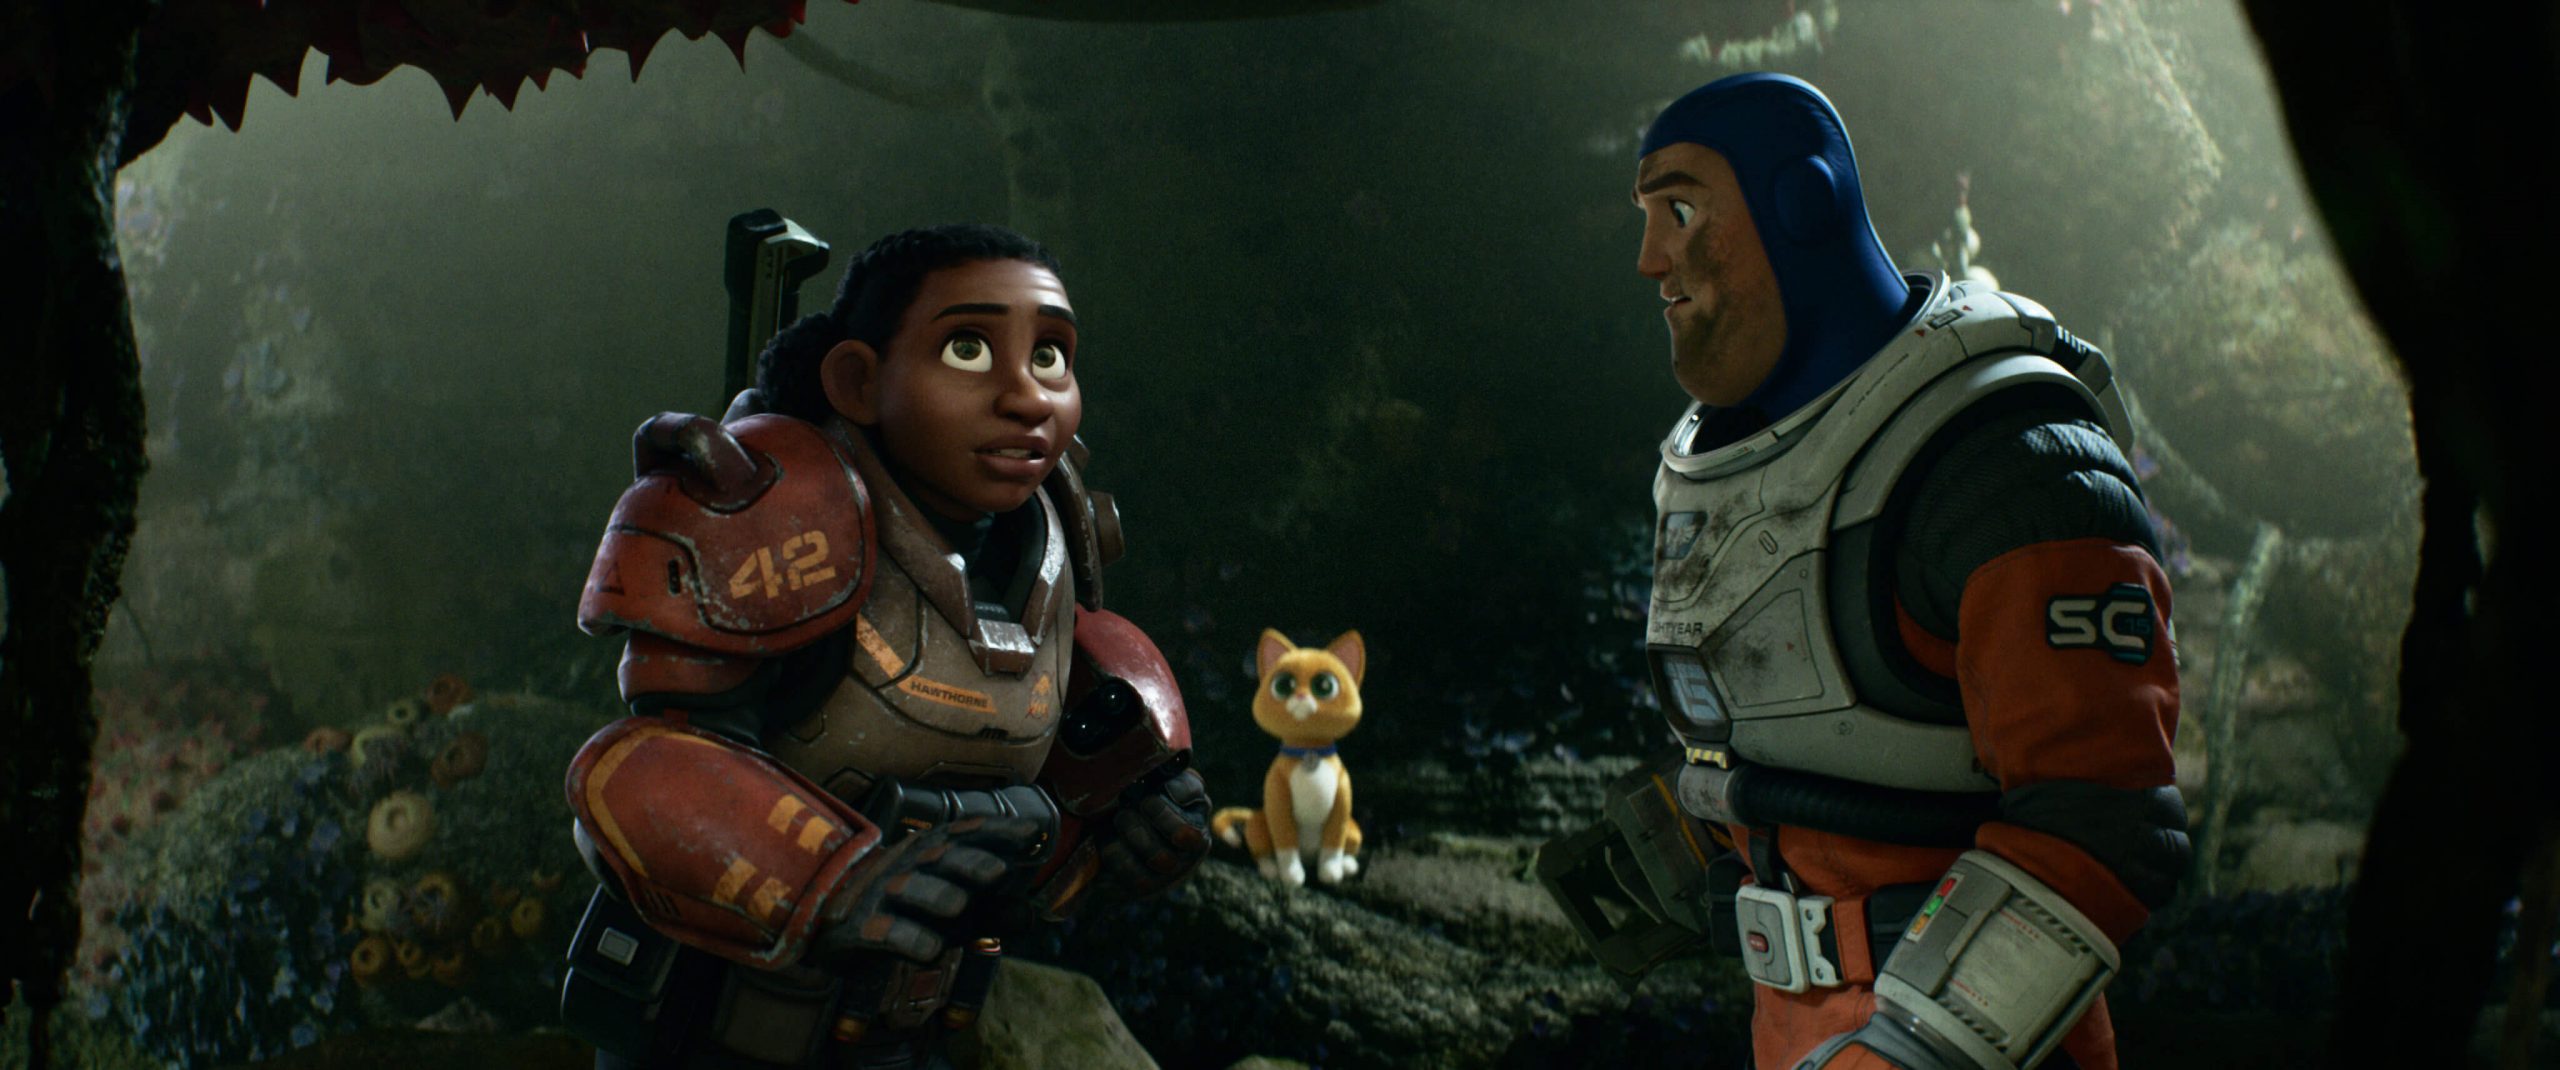 Lightyear: Toy Story spinoff is full of heart, diversity & living in the moment